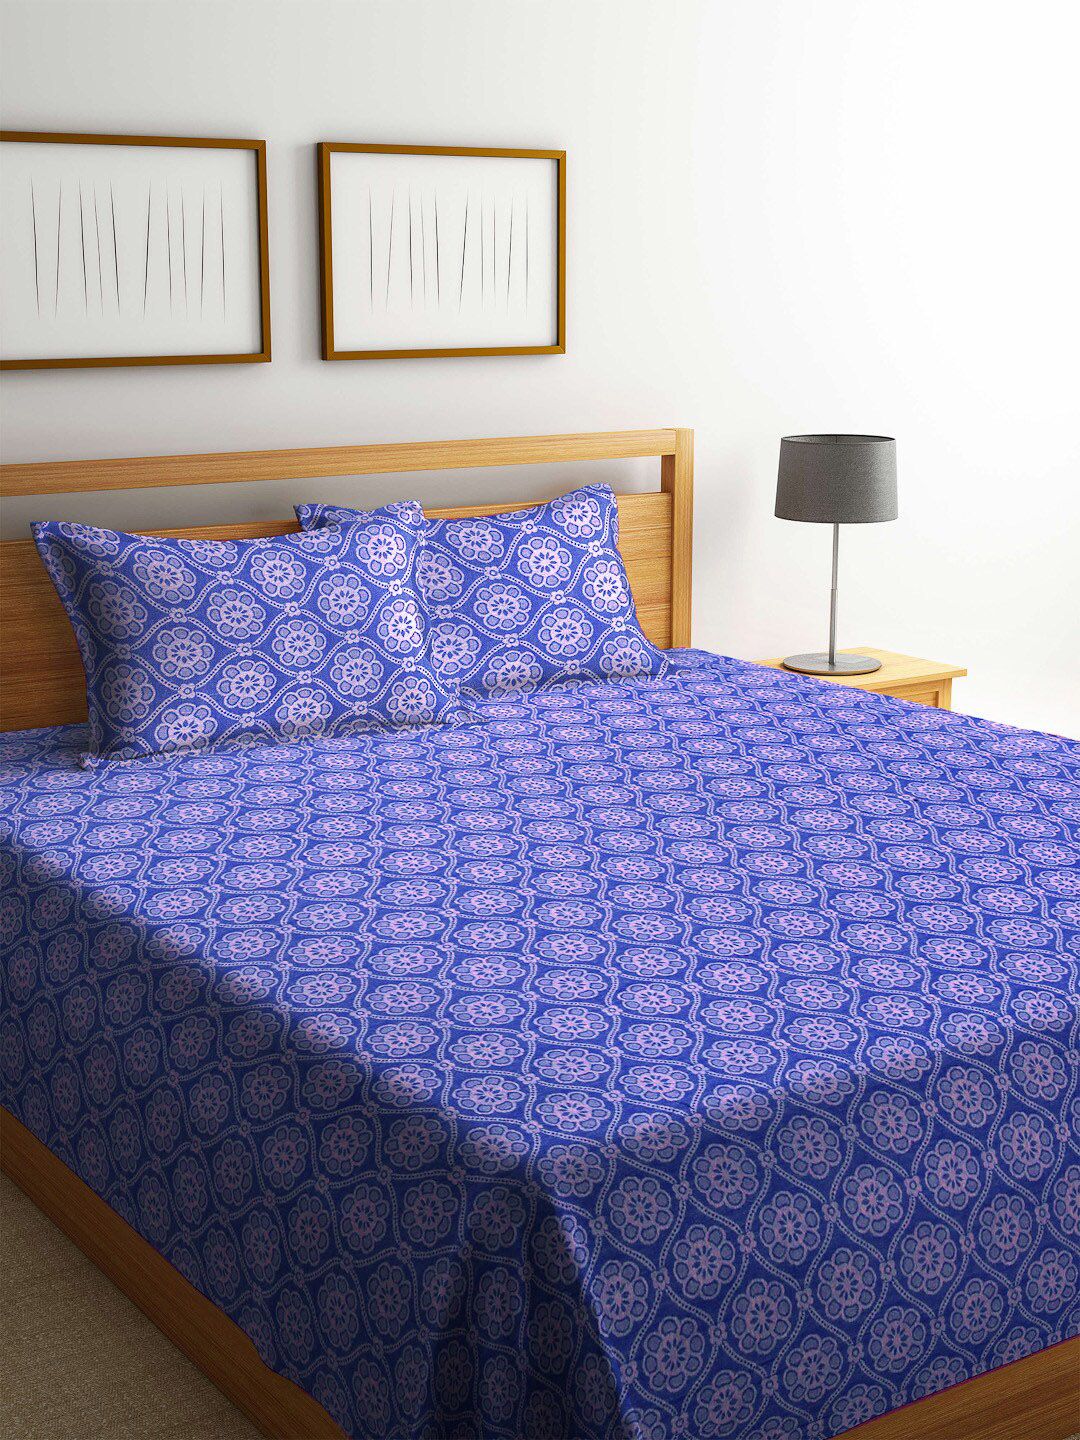 KLOTTHE Blue & White Woven Design Cotton 1 Double King Bedcover With 2 Pillow Covers Price in India